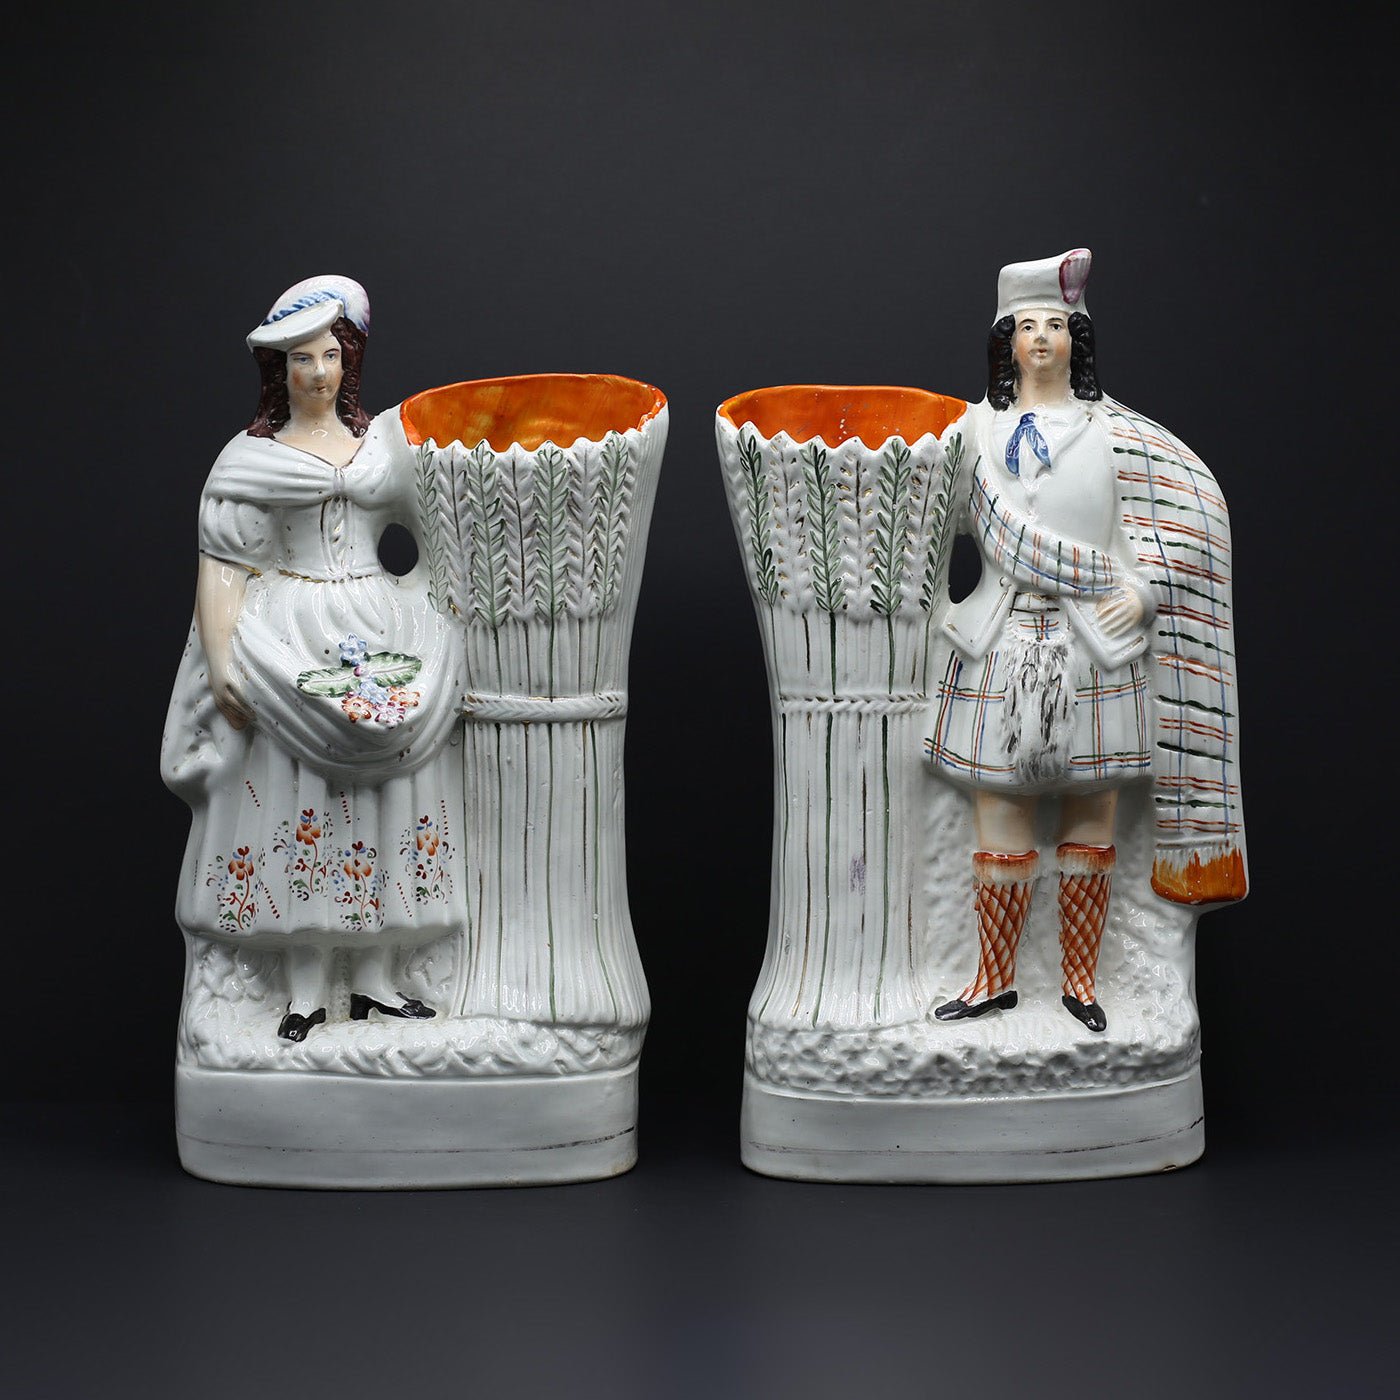 Pair of Staffordshire Vases - Highland Couple With Wheat Sheaves. - FLORA BLACK